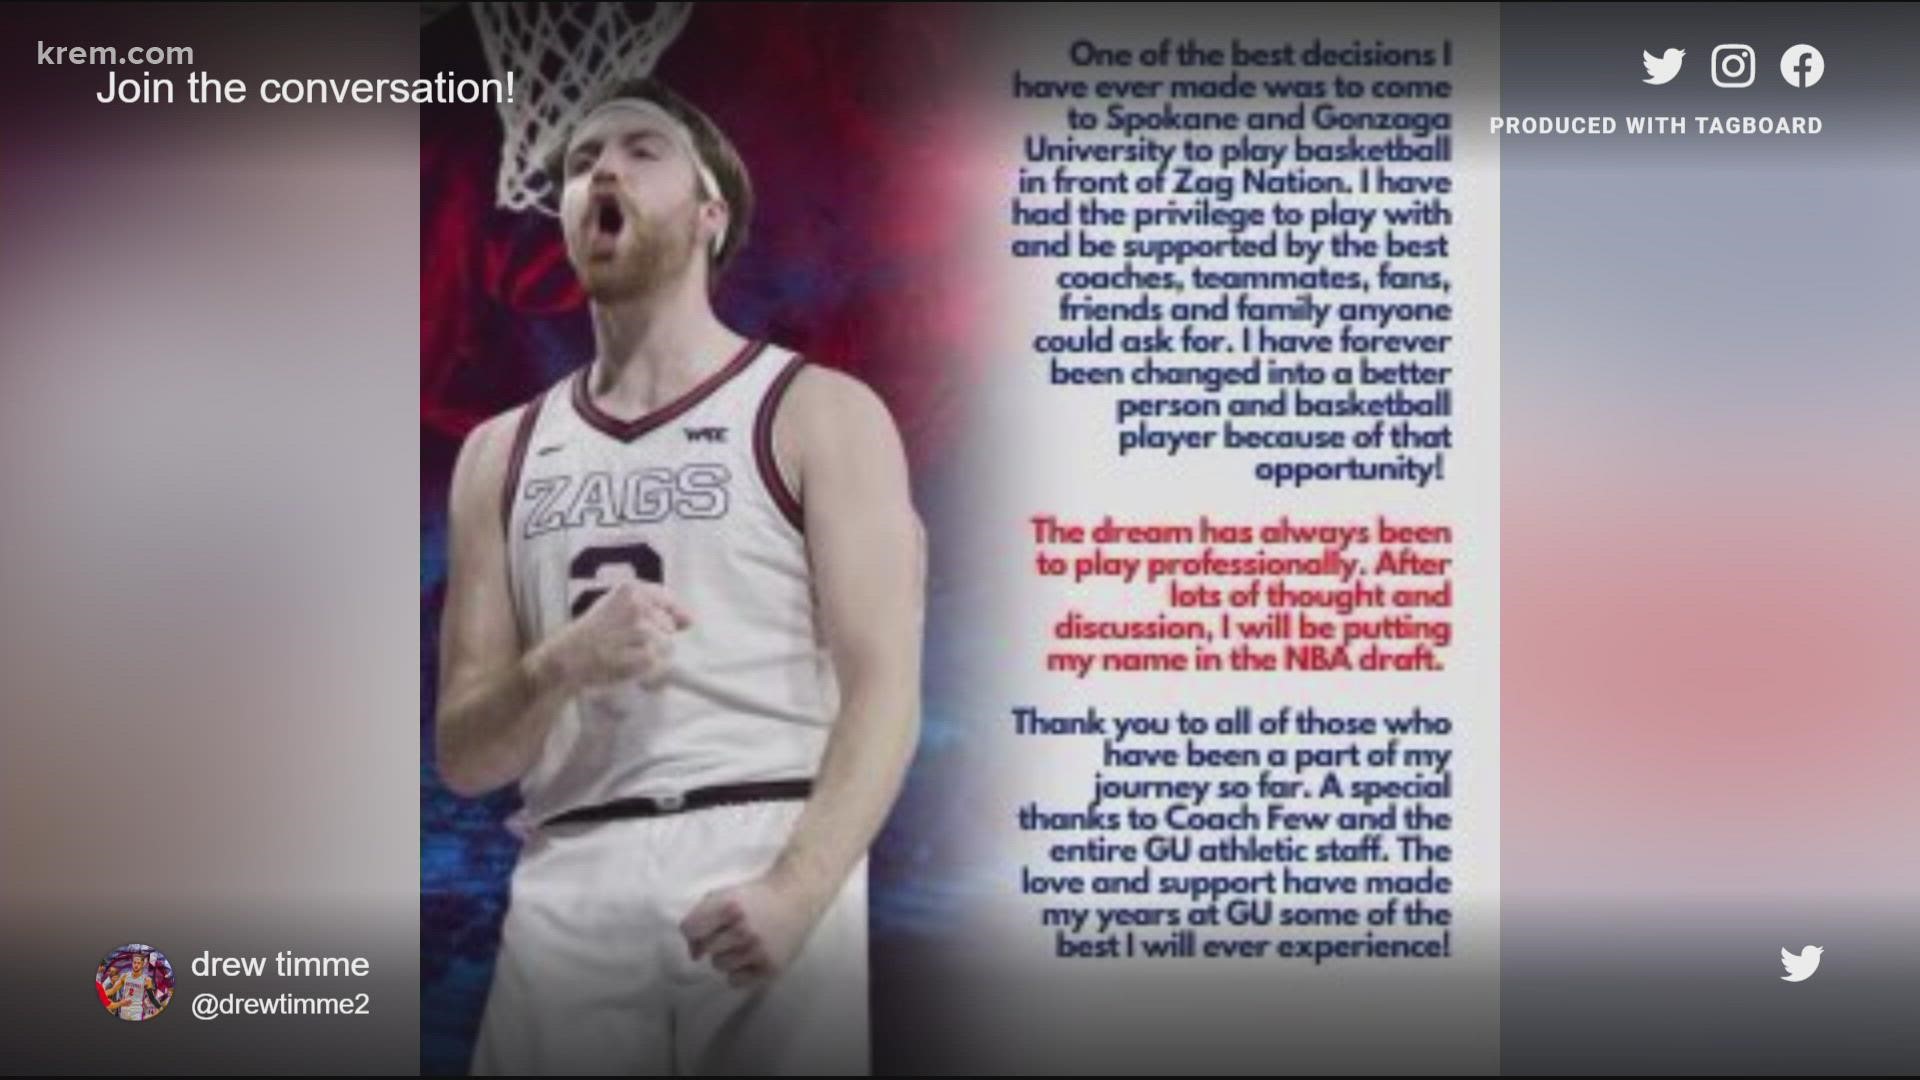 In a tweet, Timme wrote coming to Spokane and playing basketball for Gonzaga was one of the best decisions he ever made.